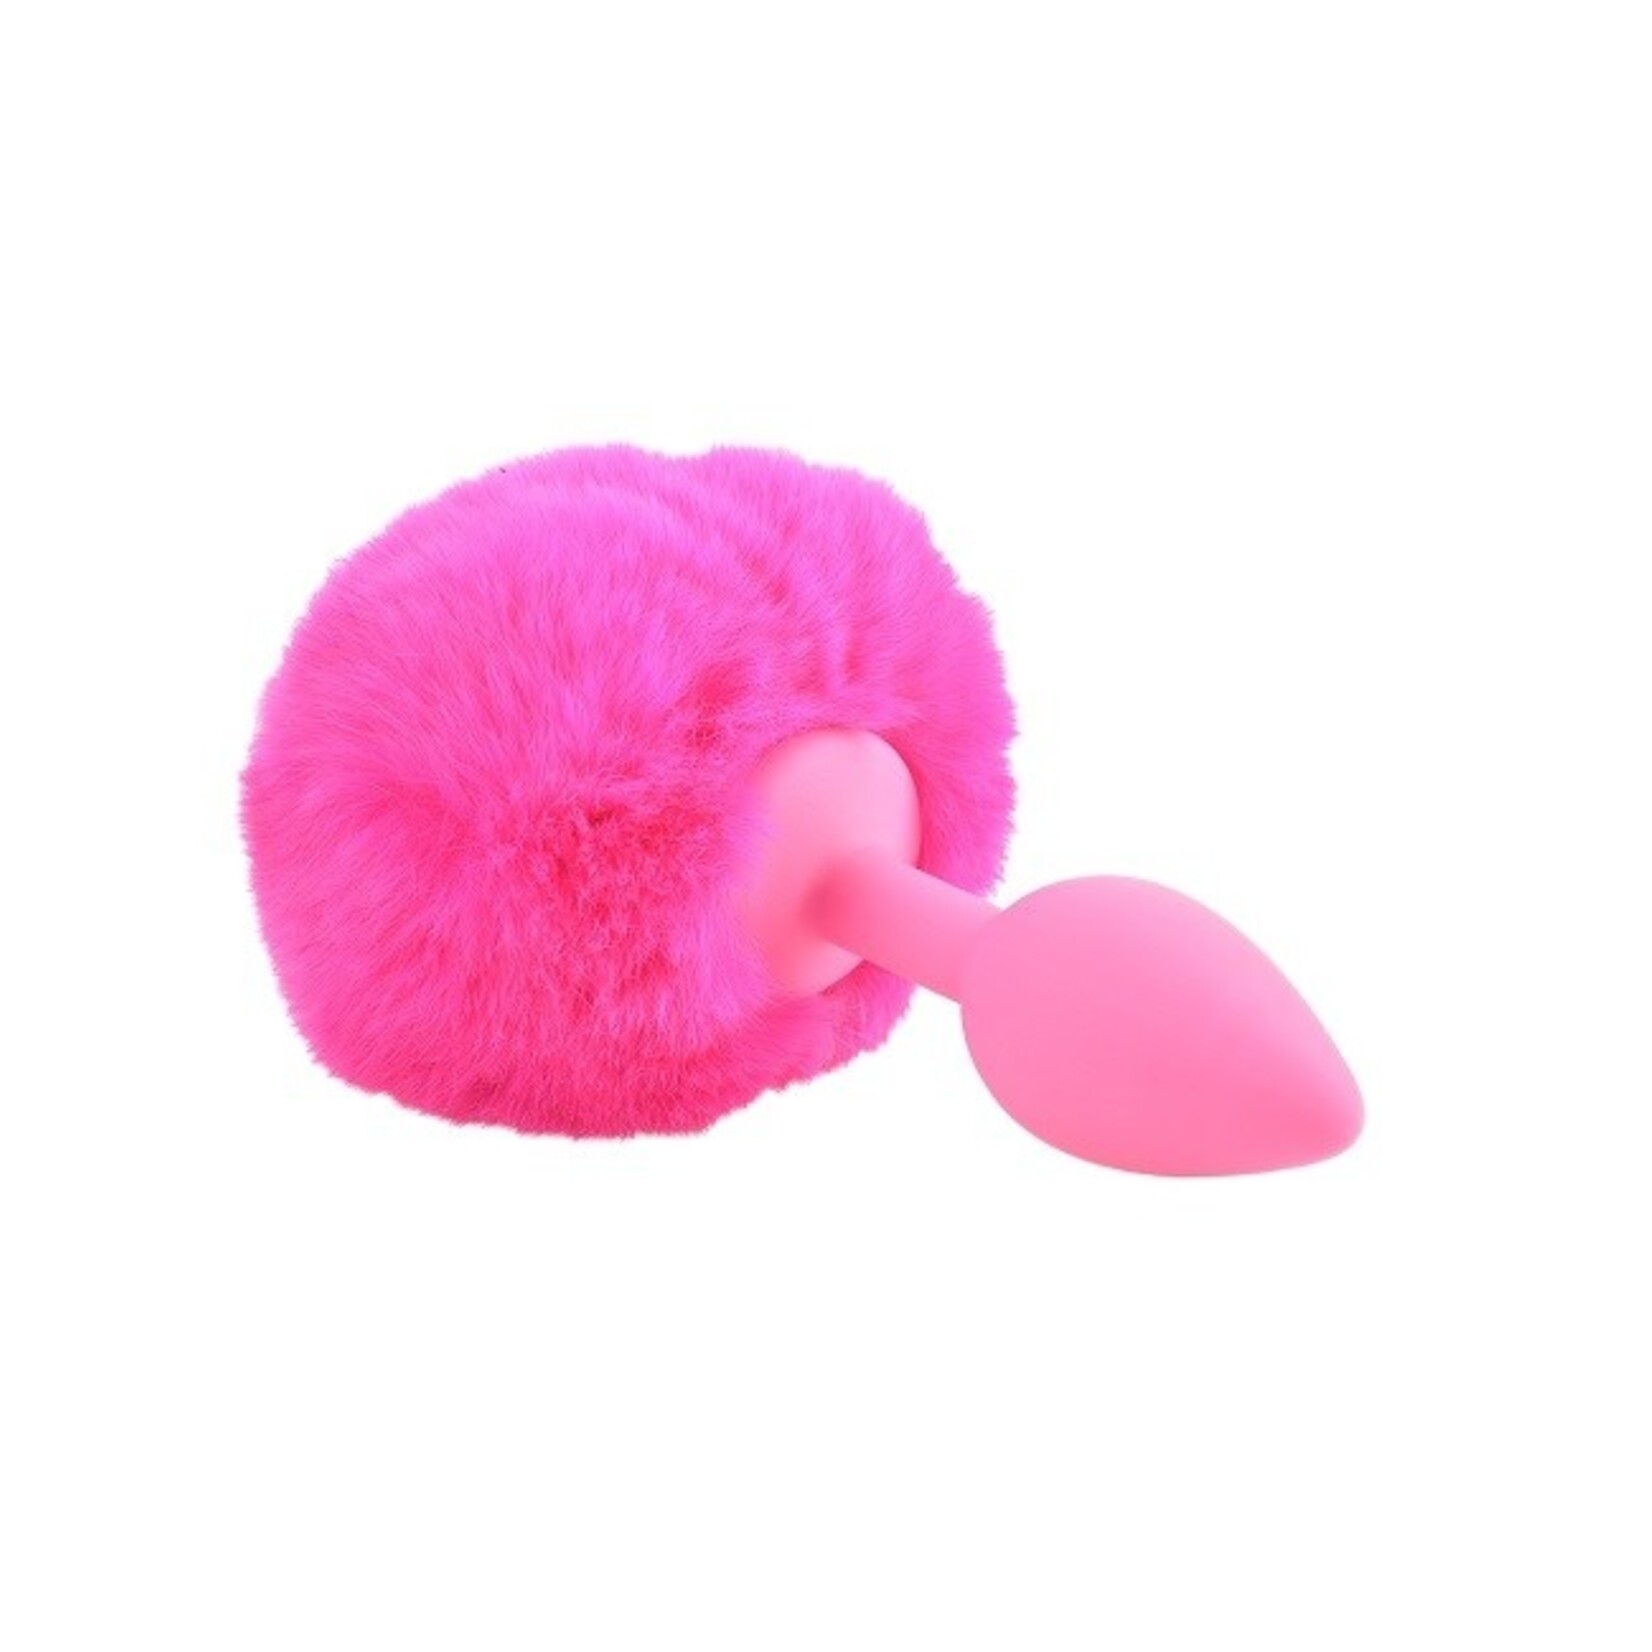 Neon Luv Touch Neon Bunny Tail